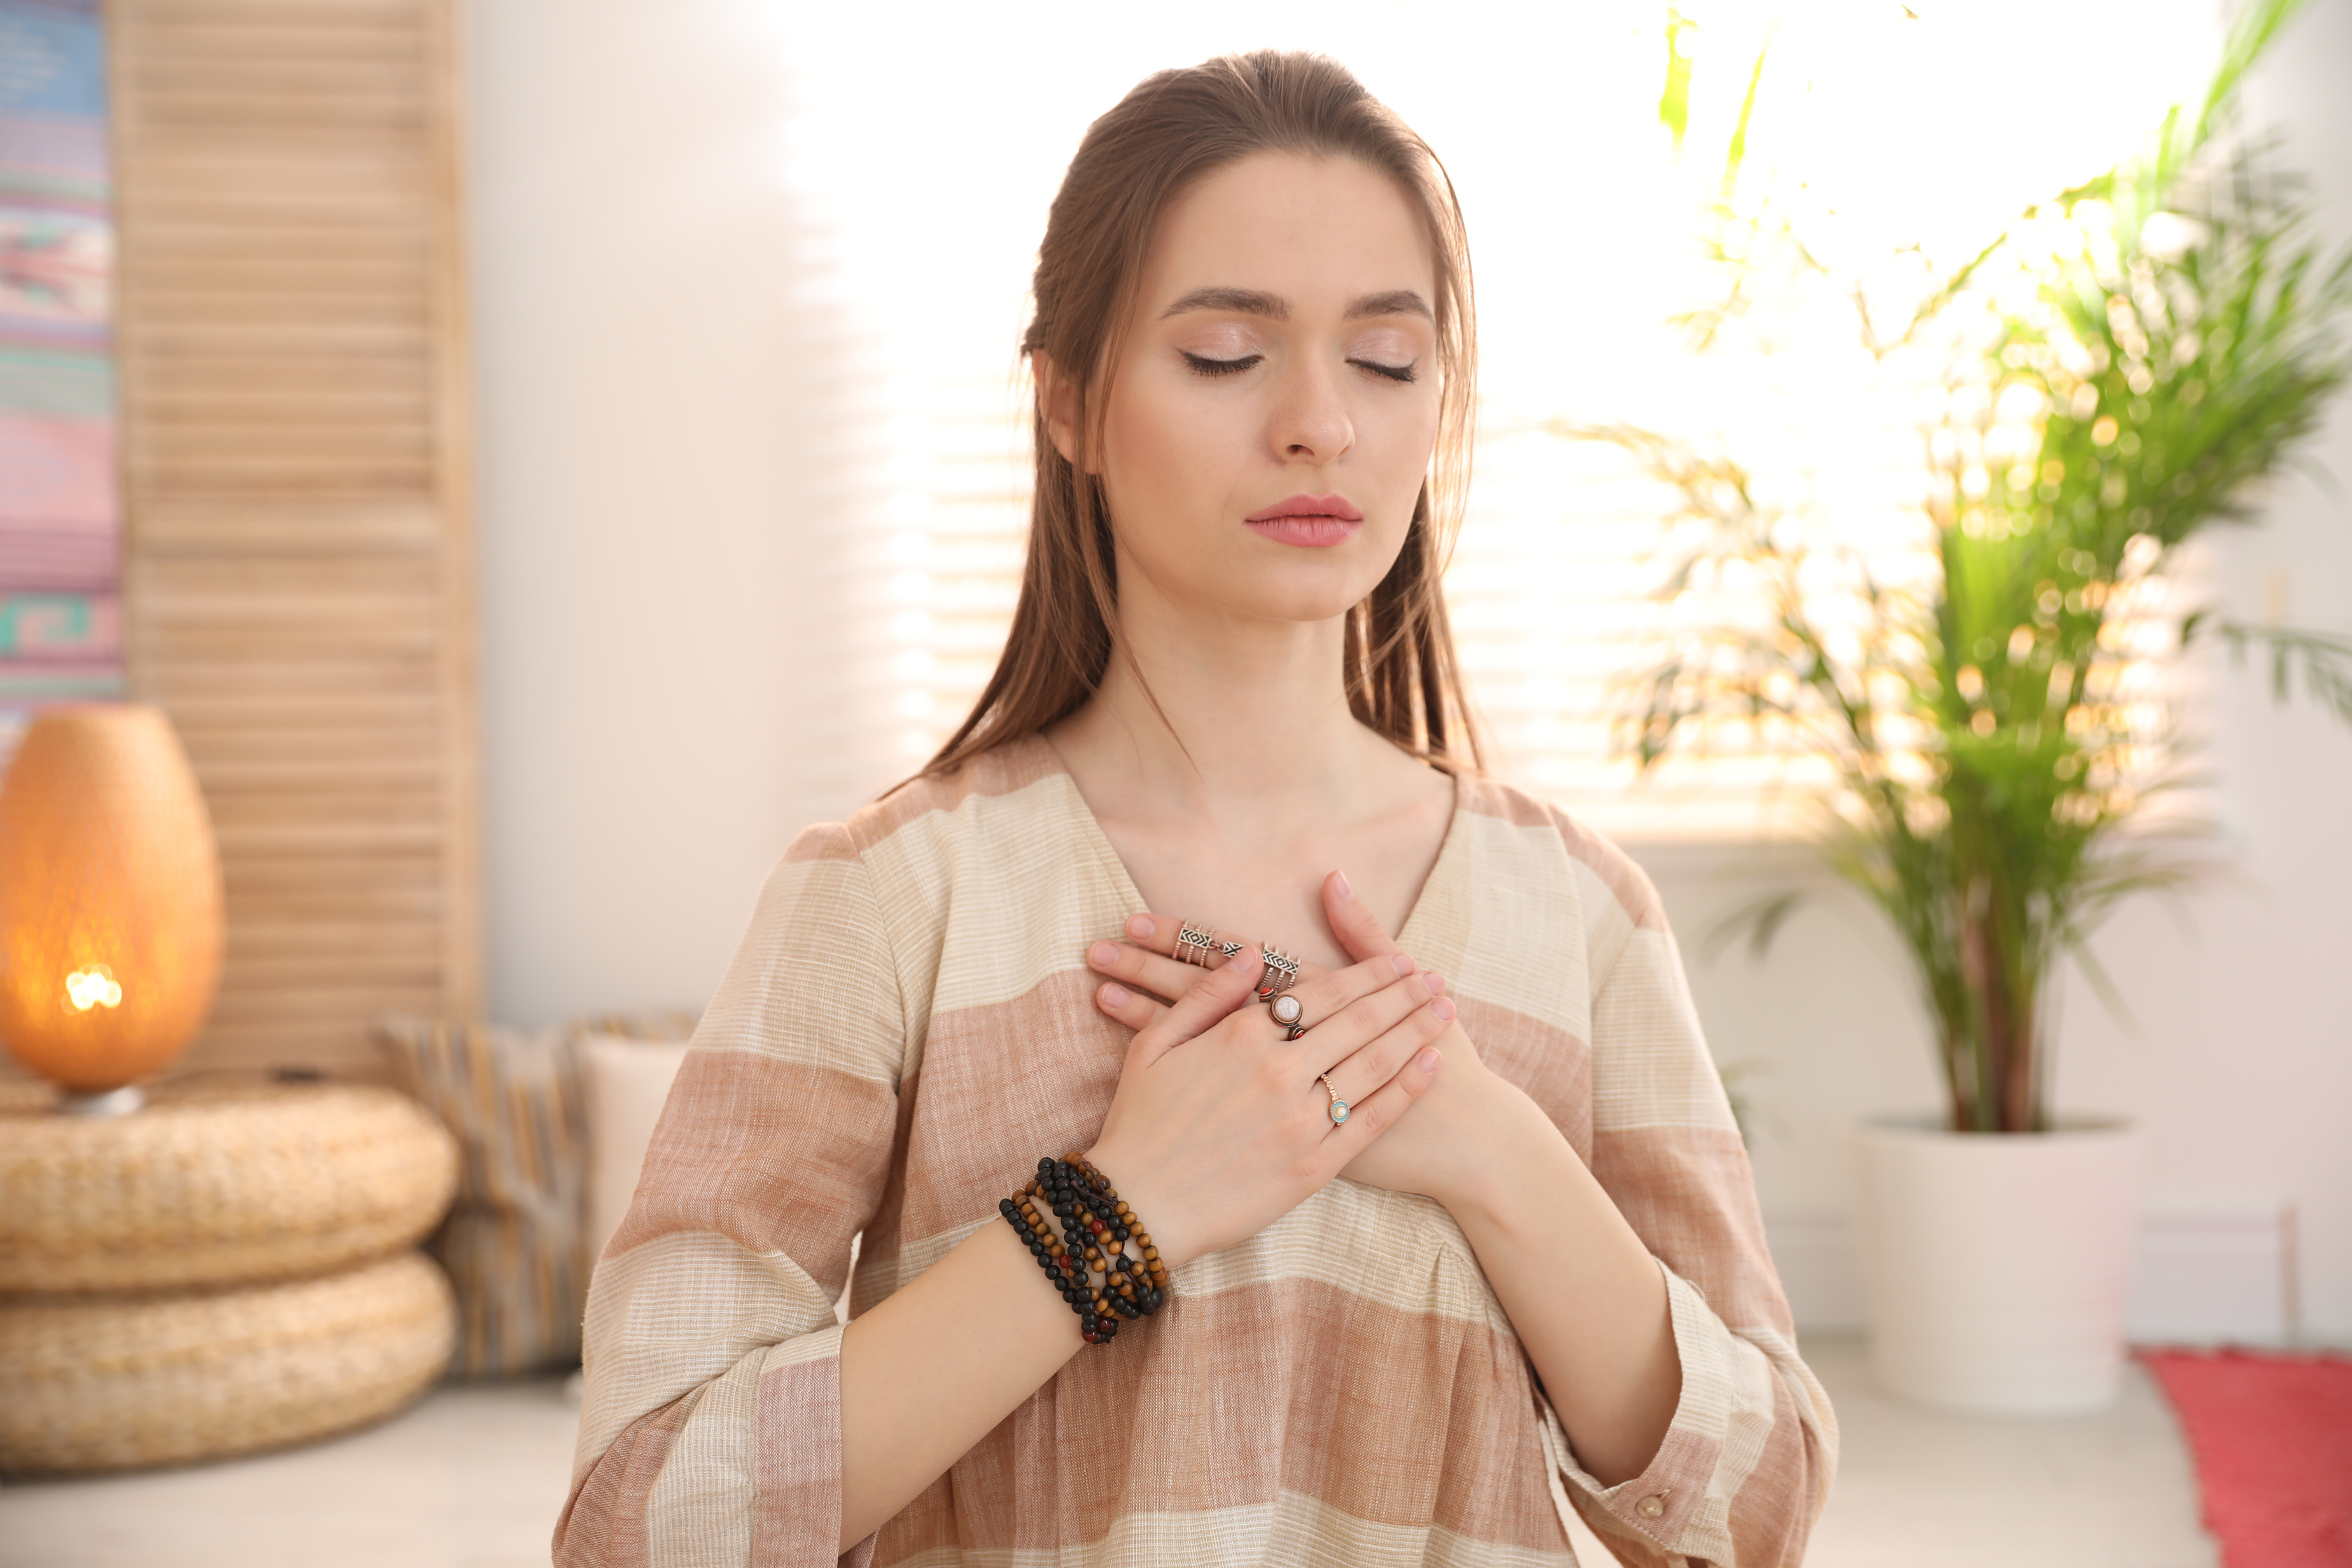 Young Woman during Self-Healing Session in  Room